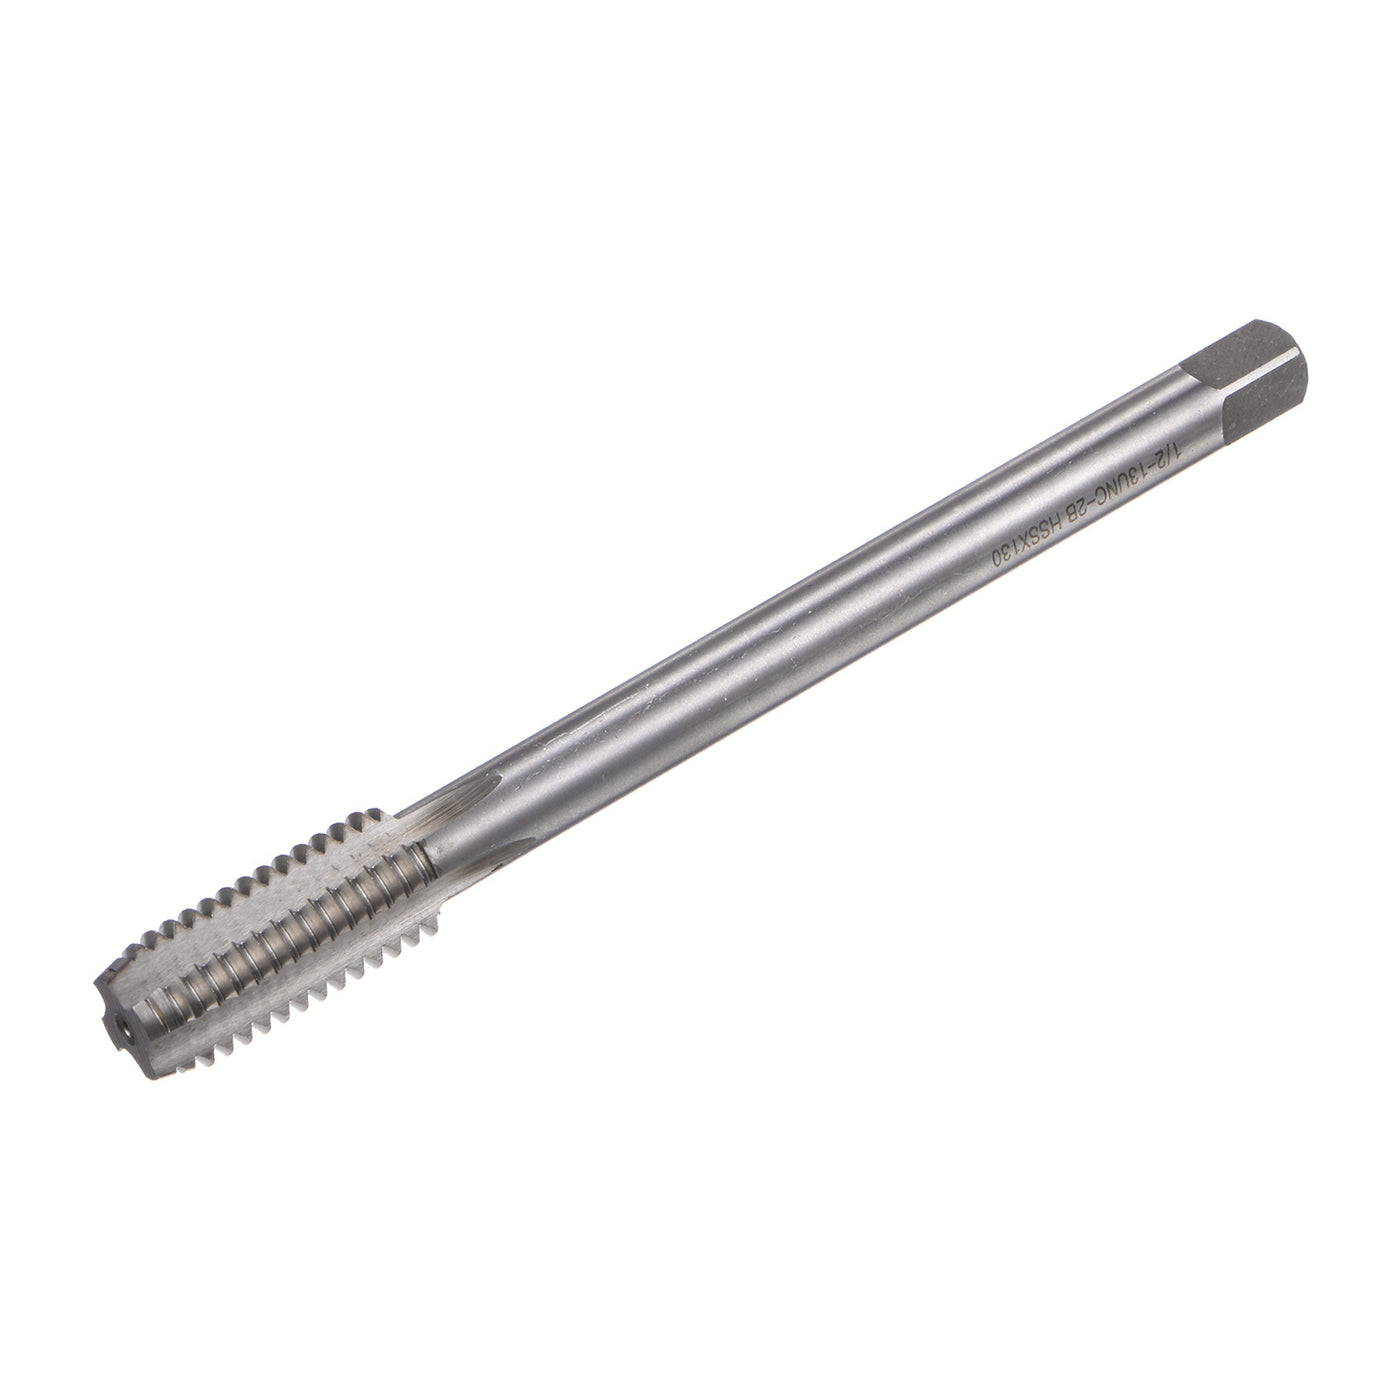 Uxcell Uxcell 9/16-12 UNC High Speed Steel 5" Length 4 Straight Flute Machine Screw Thread Tap